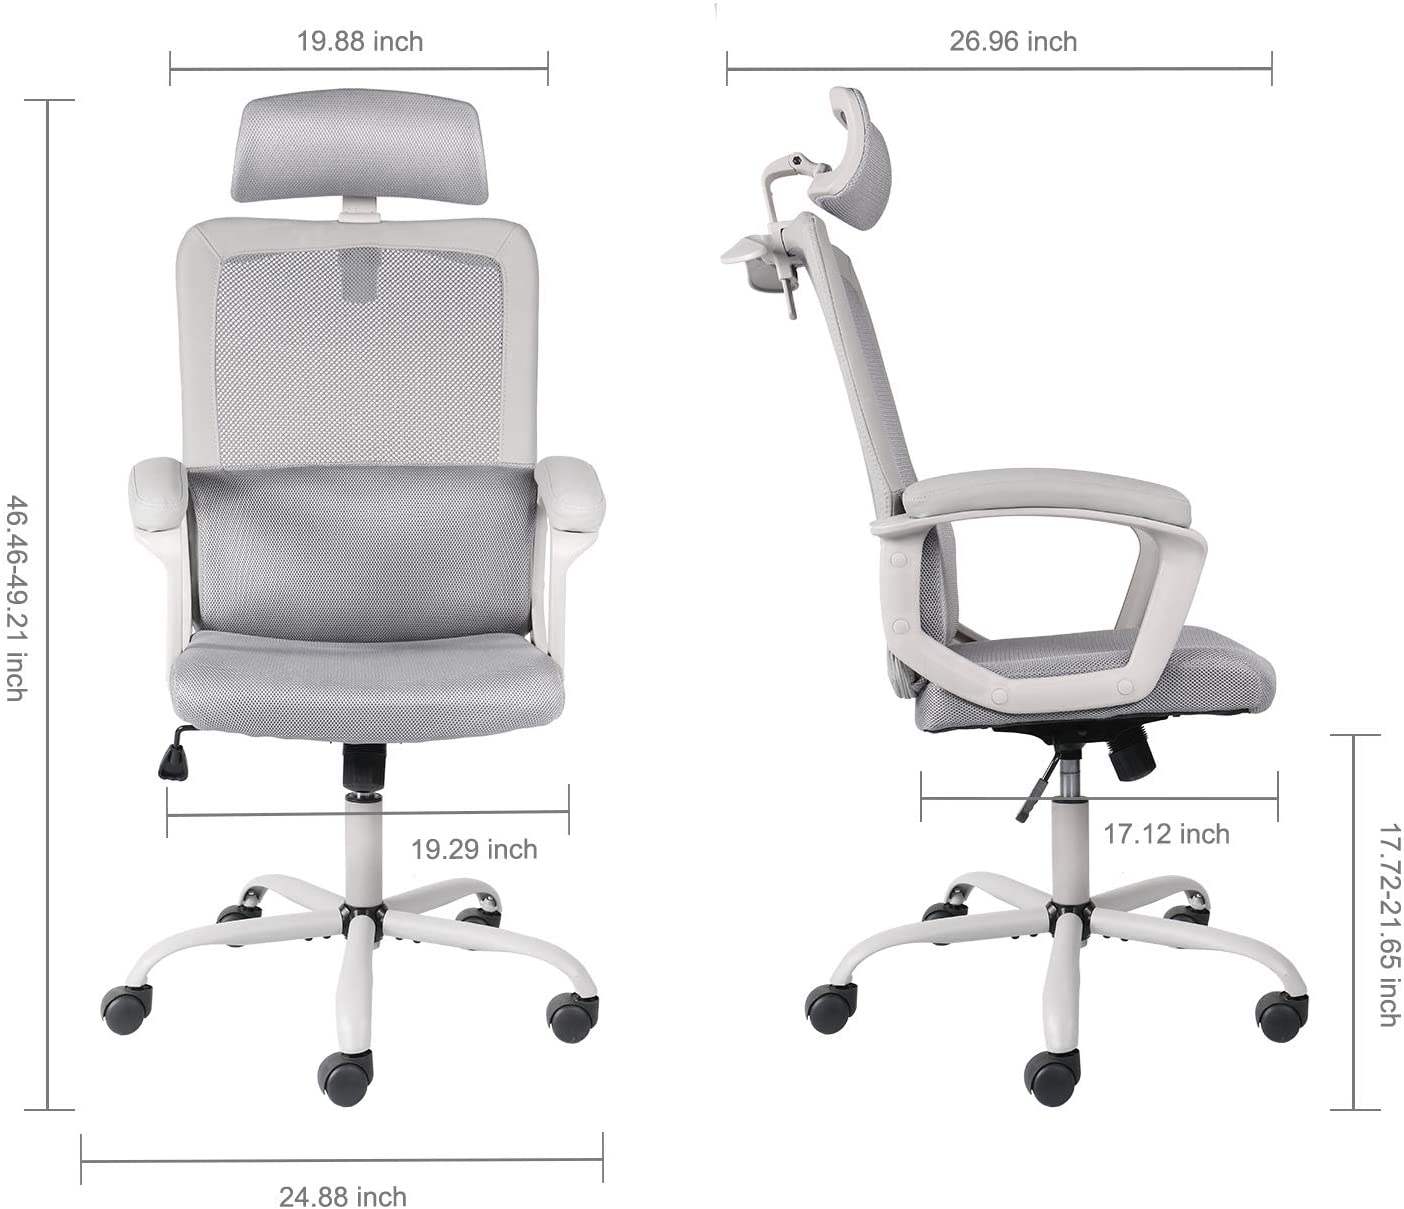 Black Mesh Office Chair with Headrest : 7307 - Pilot by Harmony Collection